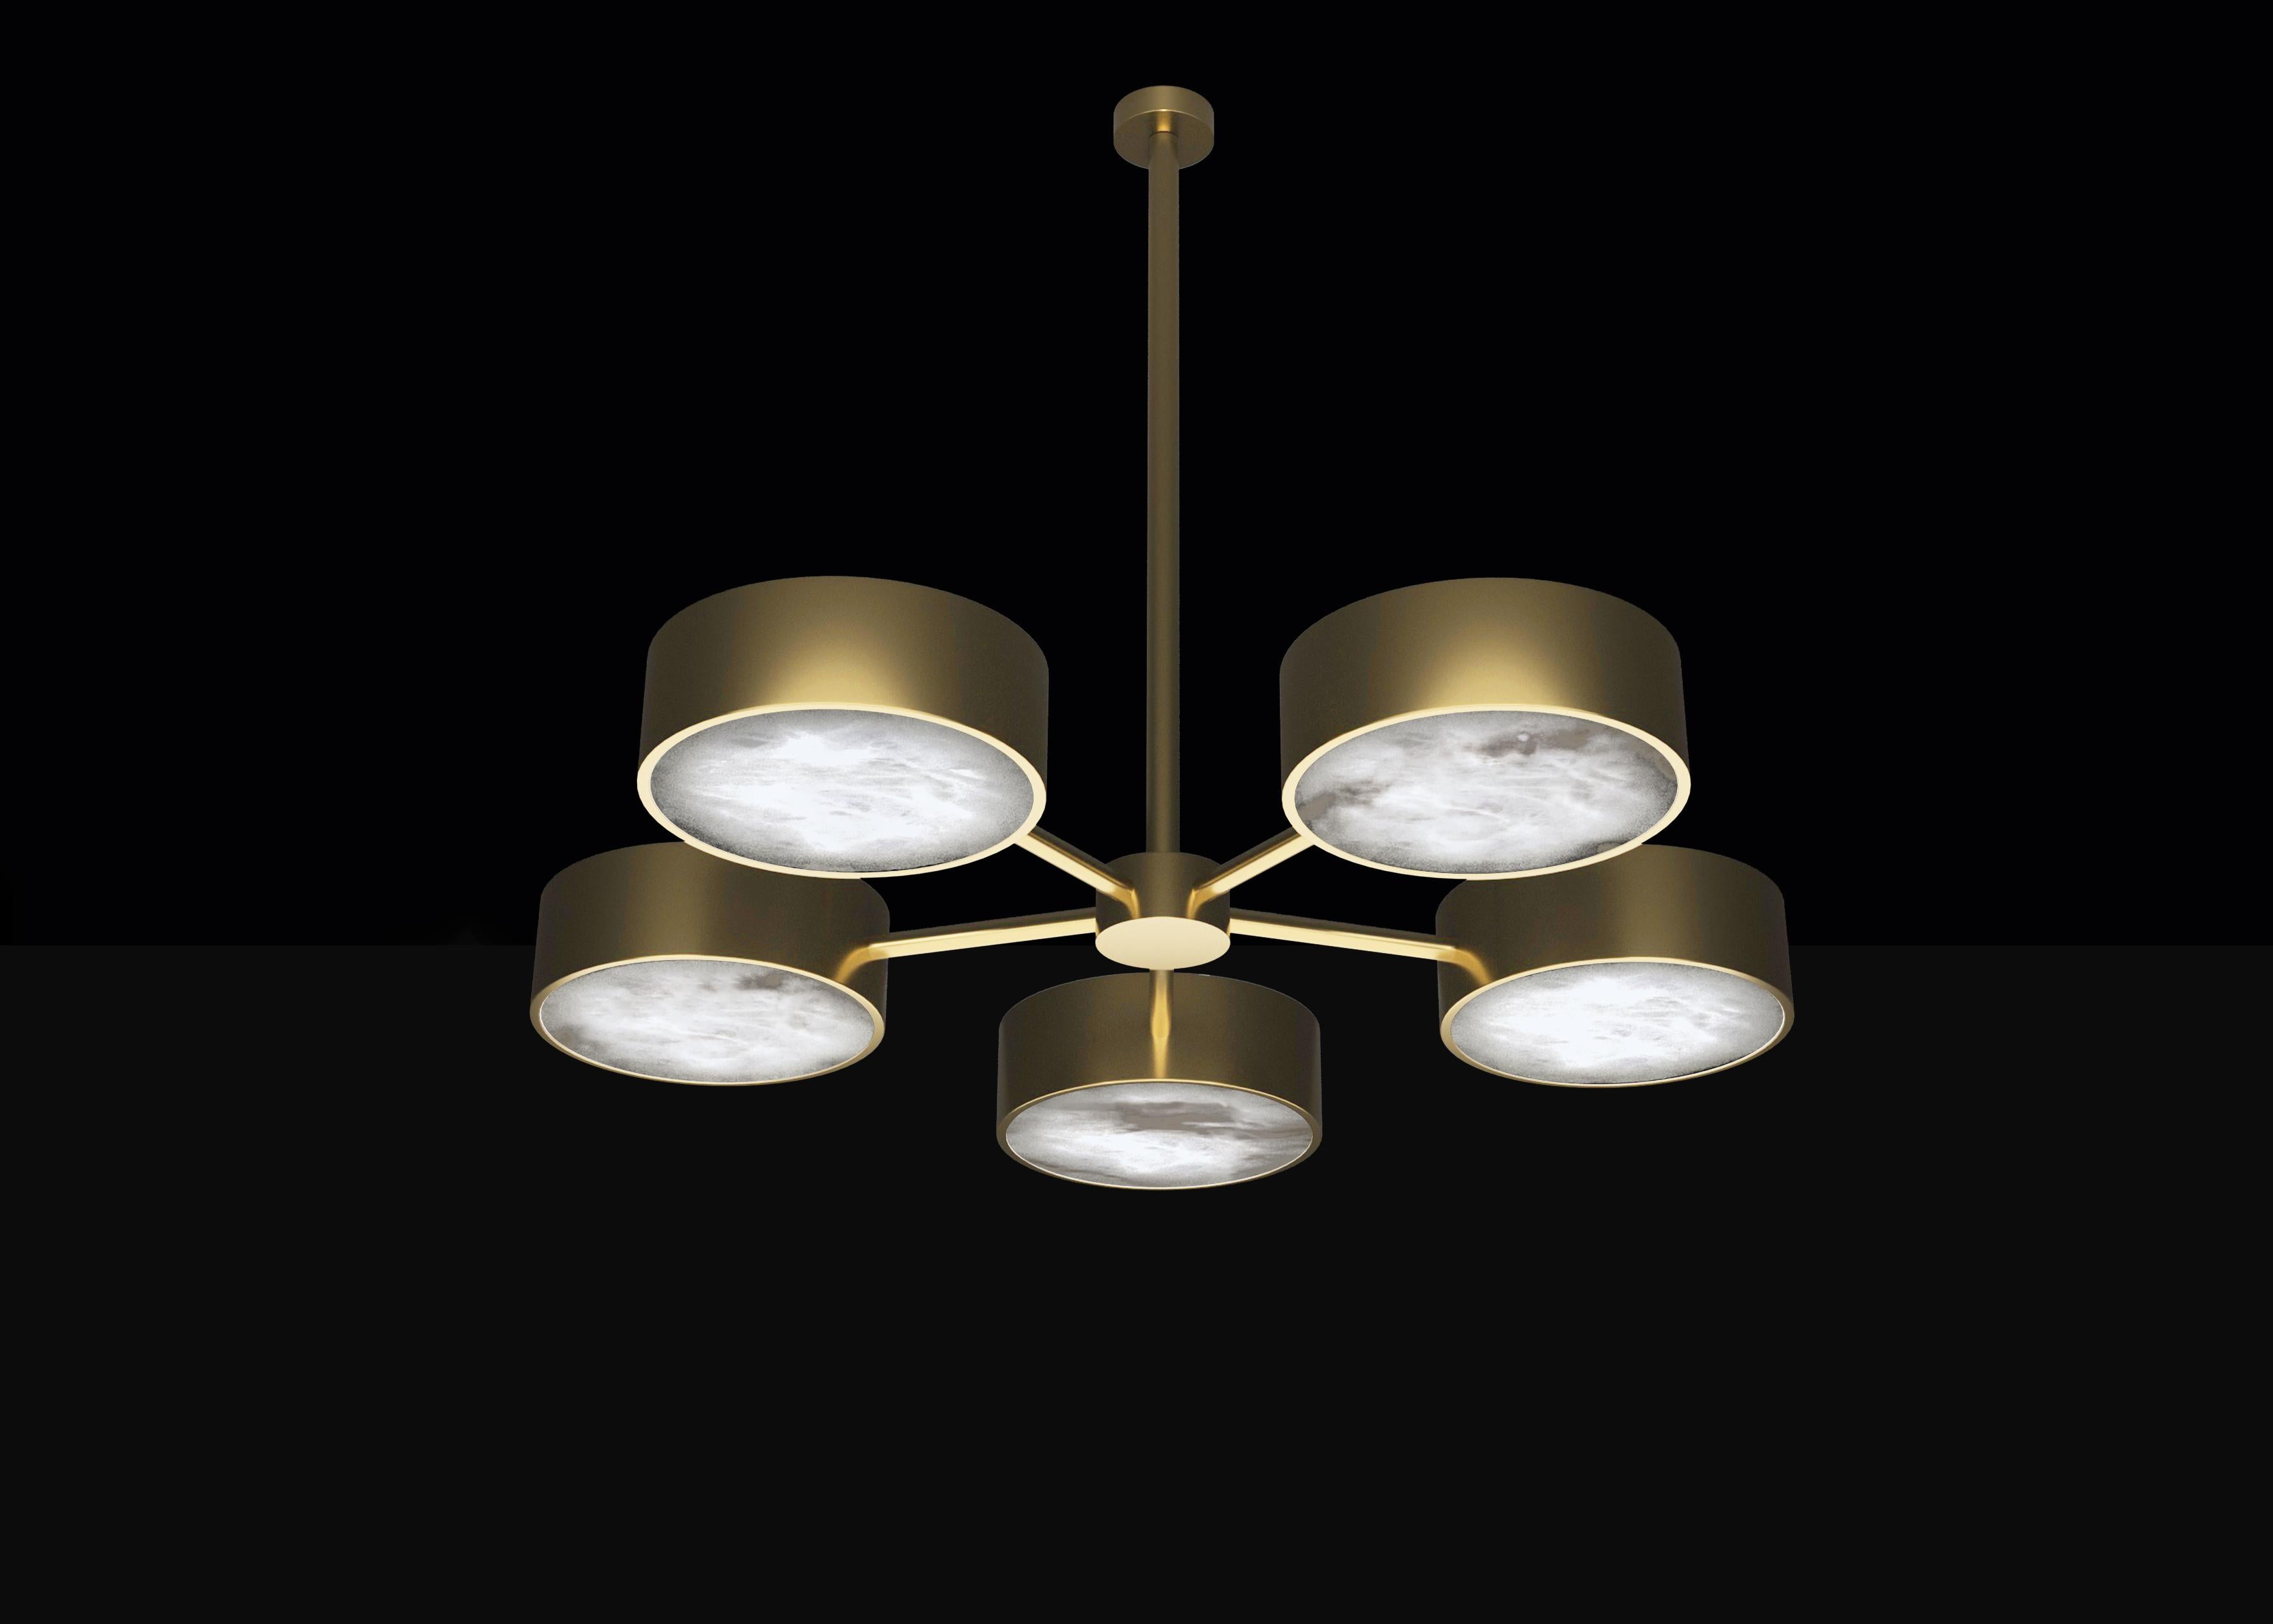 Chaos Bronze Chandelier by Alabastro Italiano
Dimensions: D 97 x W 100 x H 84.5 cm.
Materials: White alabaster and bronze.

Available in different finishes: Shiny Silver, Bronze, Brushed Brass, Ruggine of Florence, Brushed Burnished, Shiny Gold,